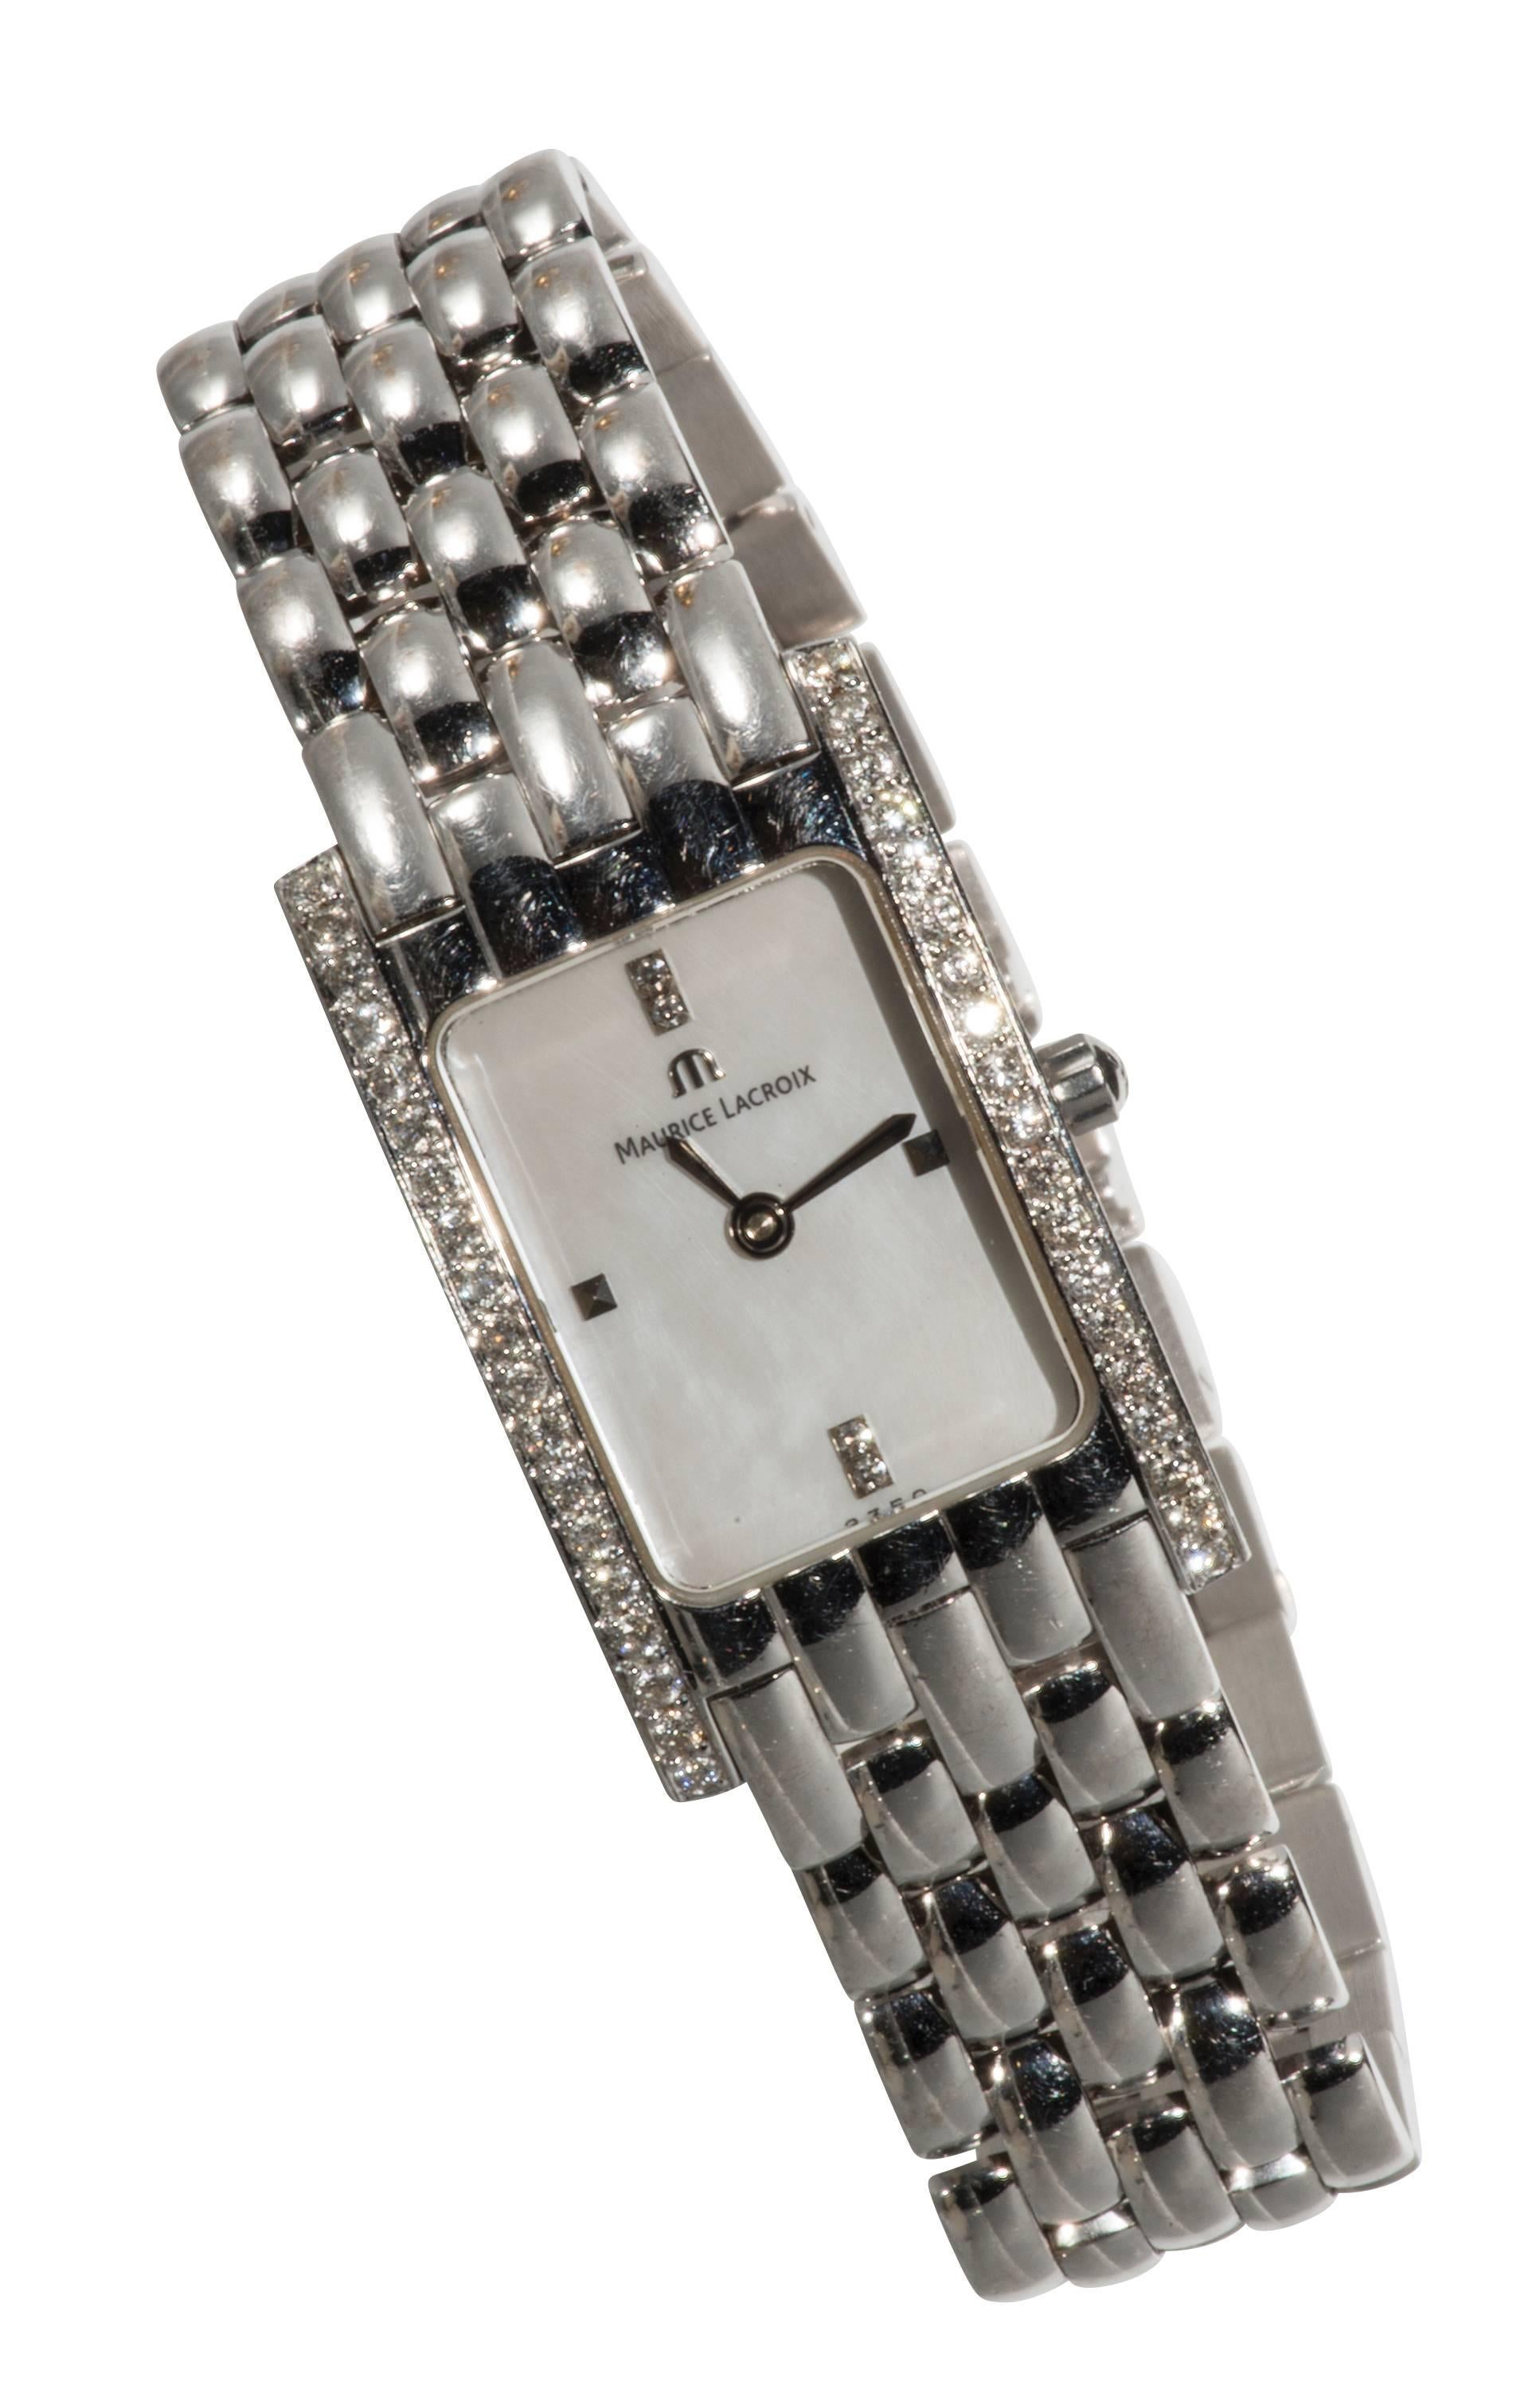 This is a beautiful 18k. white gold ladies watch with diamonds and a quartz movement.